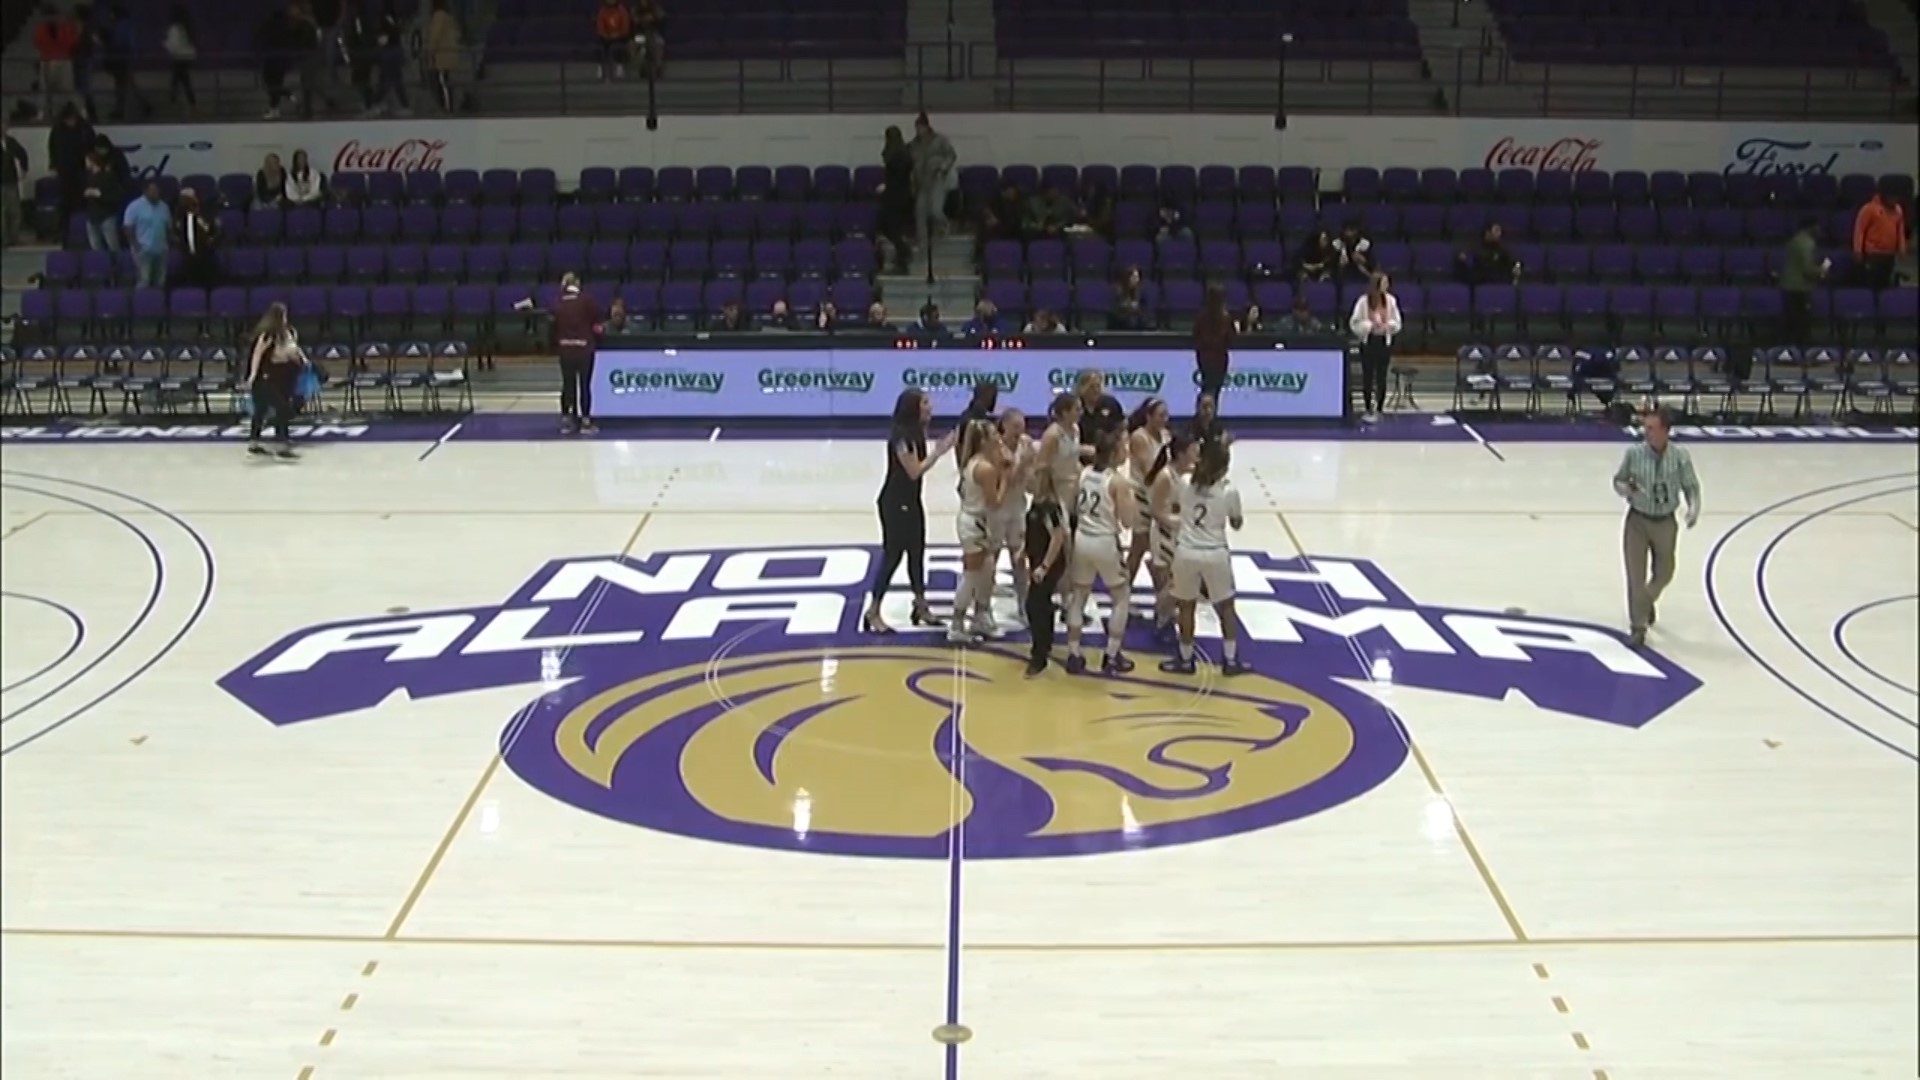 Playing short-handed and without head coach Missy Tiber, the University of North Alabama women's basketball team outlasted Eastern Kentucky 88-86 in two overtimes